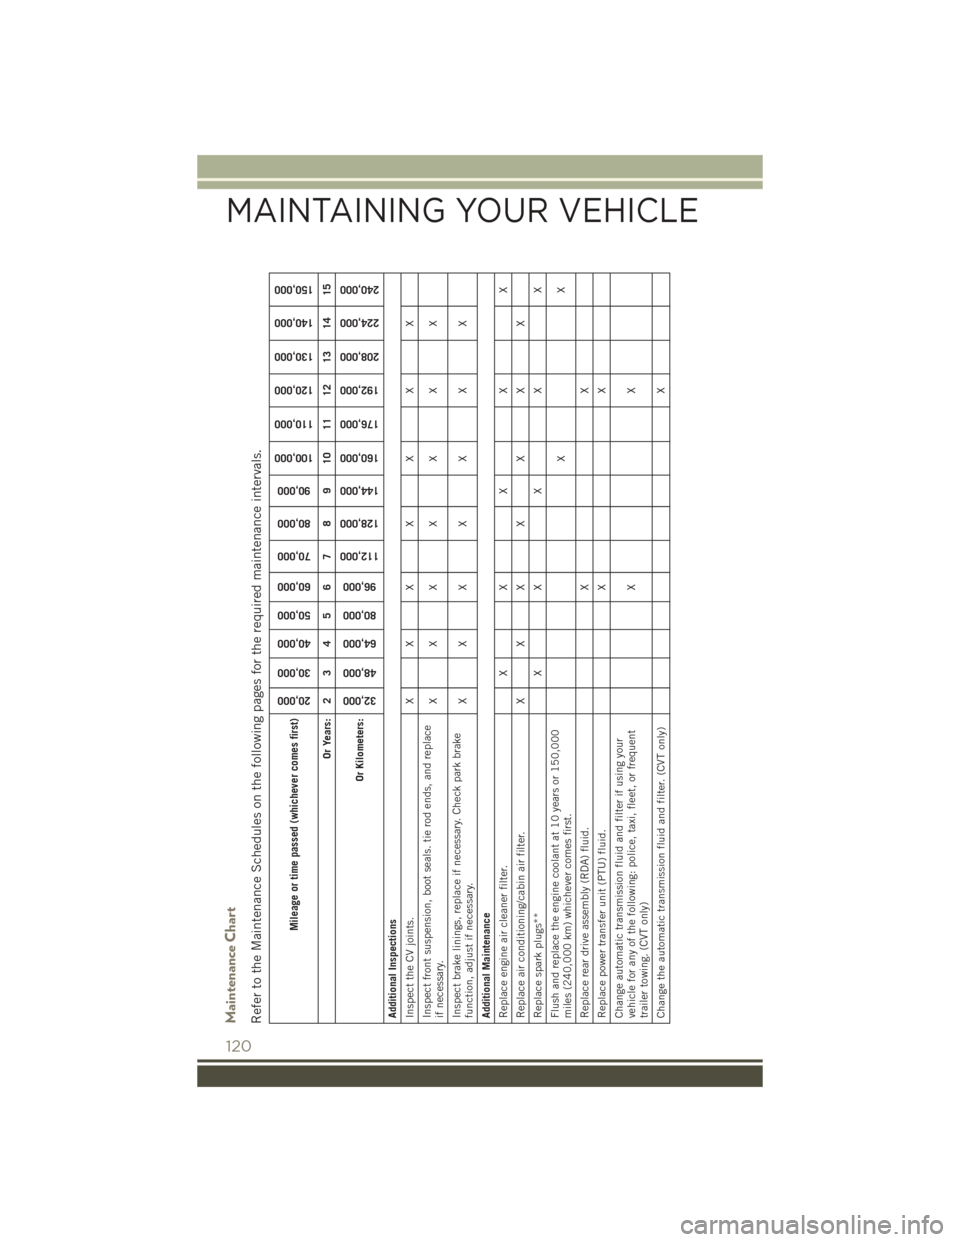 JEEP PATRIOT 2016 1.G User Guide Maintenance ChartRefer to the Maintenance Schedules on the following pages for the required maintenance intervals.
Mileage or time passed (whichever comes first)
20,000
30,000
40,000
50,000
60,000
70,